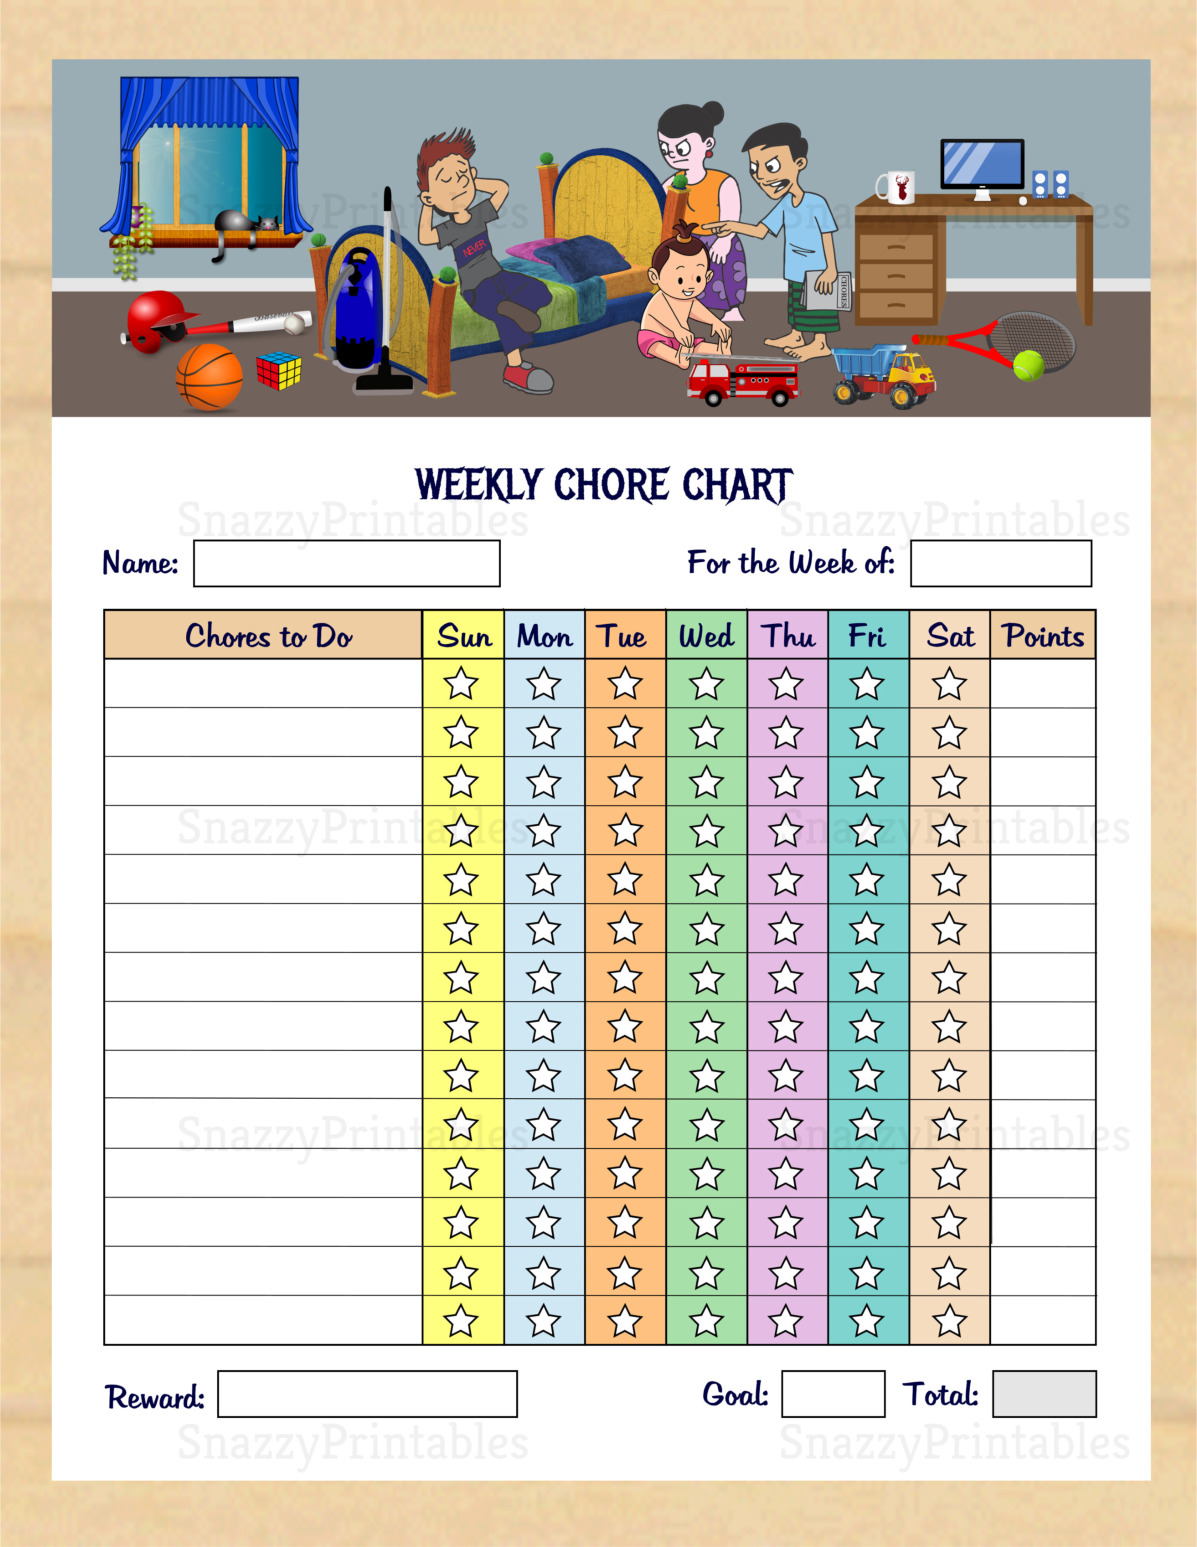 Weekly Chore Chart Printable - Instant Download PDF